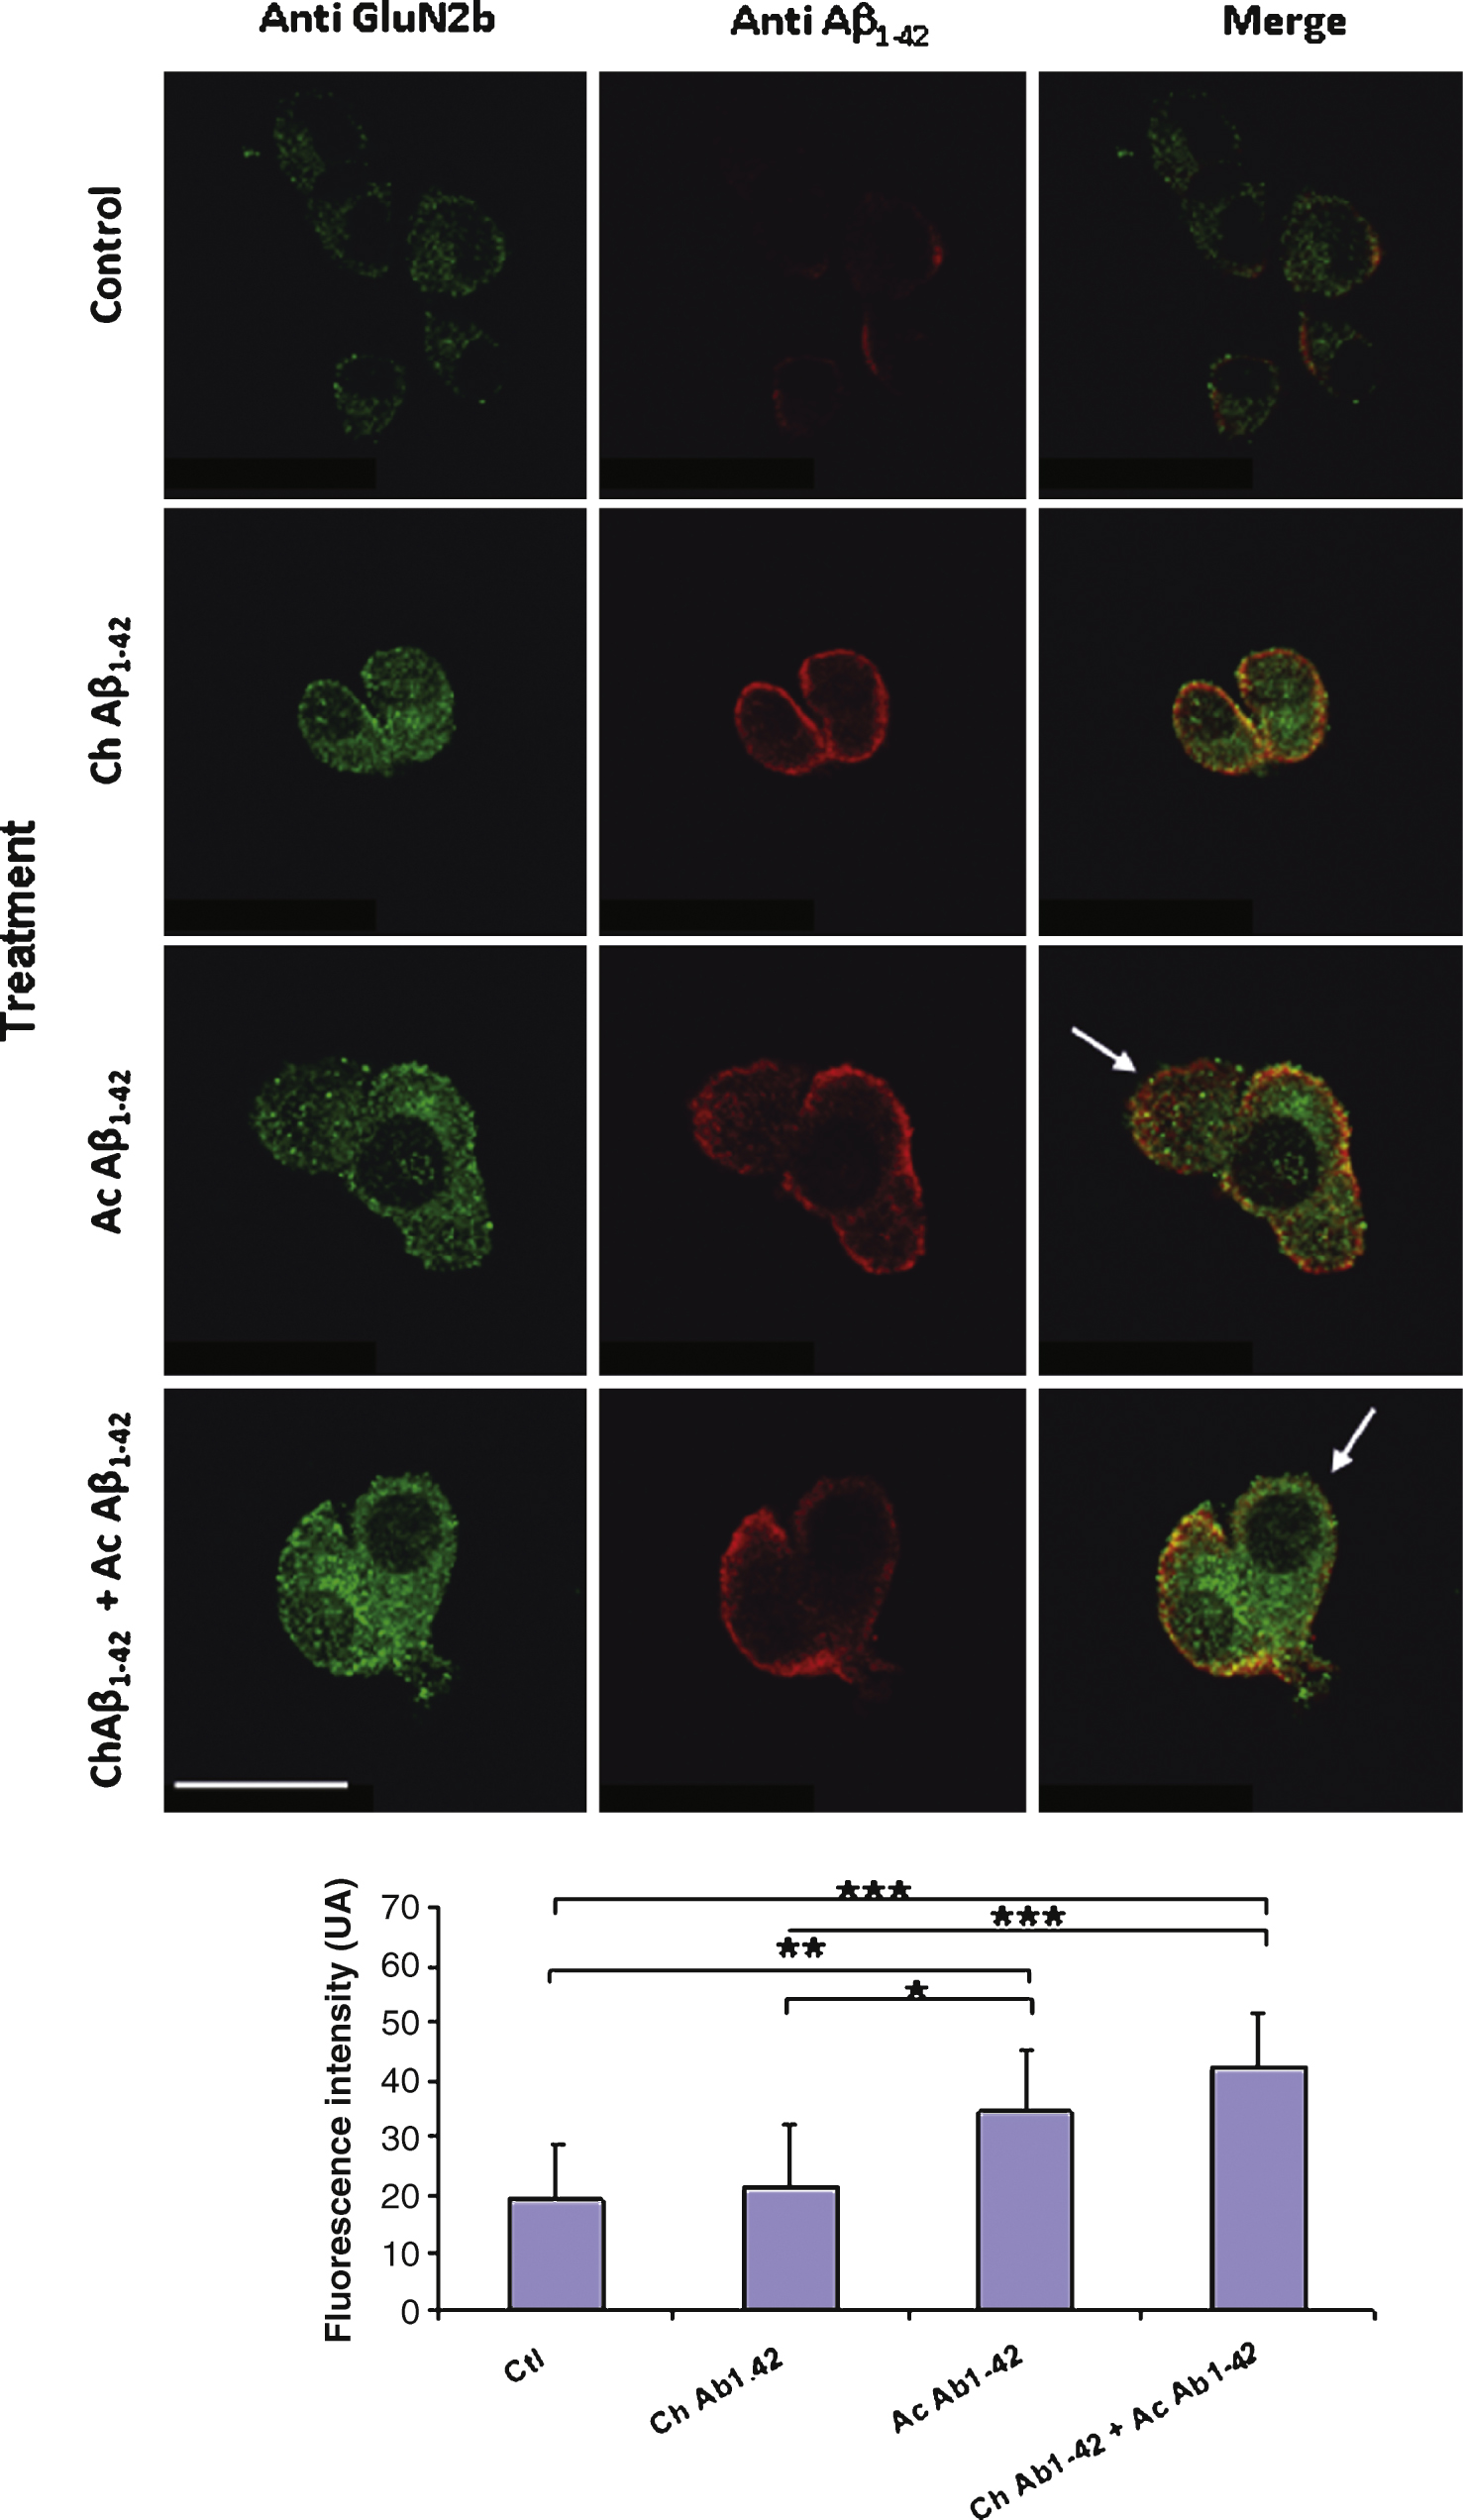 Aβ42 binding to PC12 cells is correlated with an increase in the membrane expression of GluN2B. Fixed PC12 cells were incubated with primary antibodies directed against GluN2B subunit (green) and Aβ42 (red). The chronic treatment with 10 nM Aβ1–42 monomers did not produce a significant increase of GluN2B immunoreactivity. The fluorescence intensity related to GluN2B increased when the cells were incubated with 1 μM oligomeric Aβ1–42 as illustrated by the lower panel. Note that the two antigens are partially colocalized. However in some cells this colocalization appears weak suggesting a heterogeneity among PC12 cells (white arrows). (Crl: vehicle application as control; Ac: acute 1 μM Aβ application; Ch: chronic 10 nM Aβ incubation; Statistics: one way ANOVA and subsequent Bonferroni test;  *p <  0.05;  **p <  0.01; ***p <  0.001). Calibration bar 20 μm.